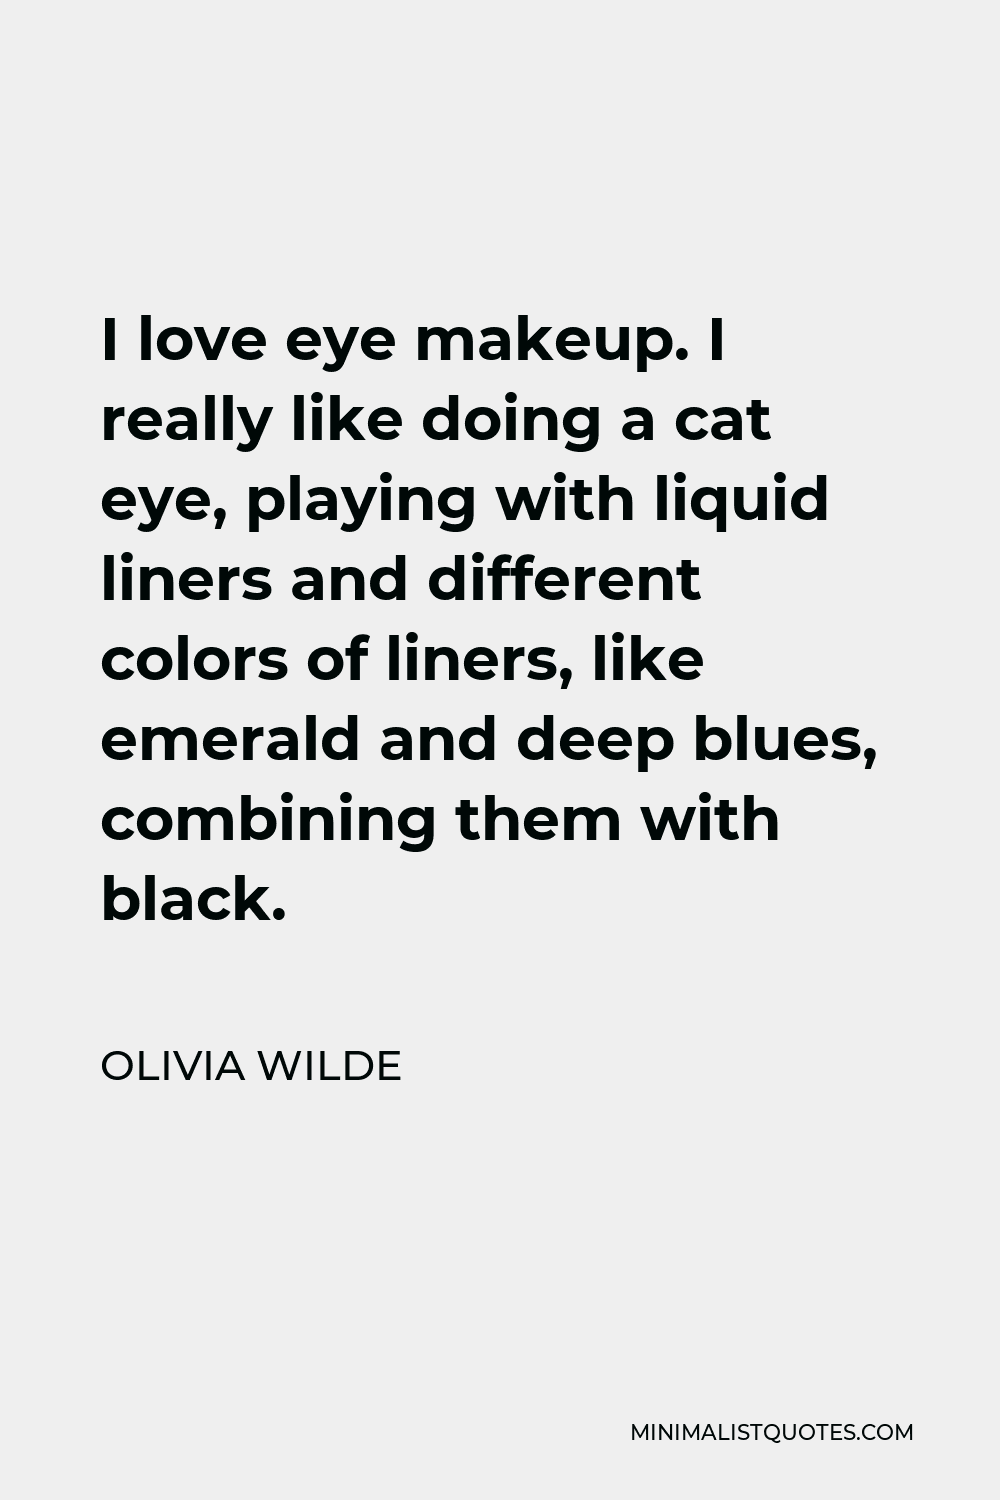 Olivia Wilde Quote - I love eye makeup. I really like doing a cat eye, playing with liquid liners and different colors of liners, like emerald and deep blues, combining them with black.